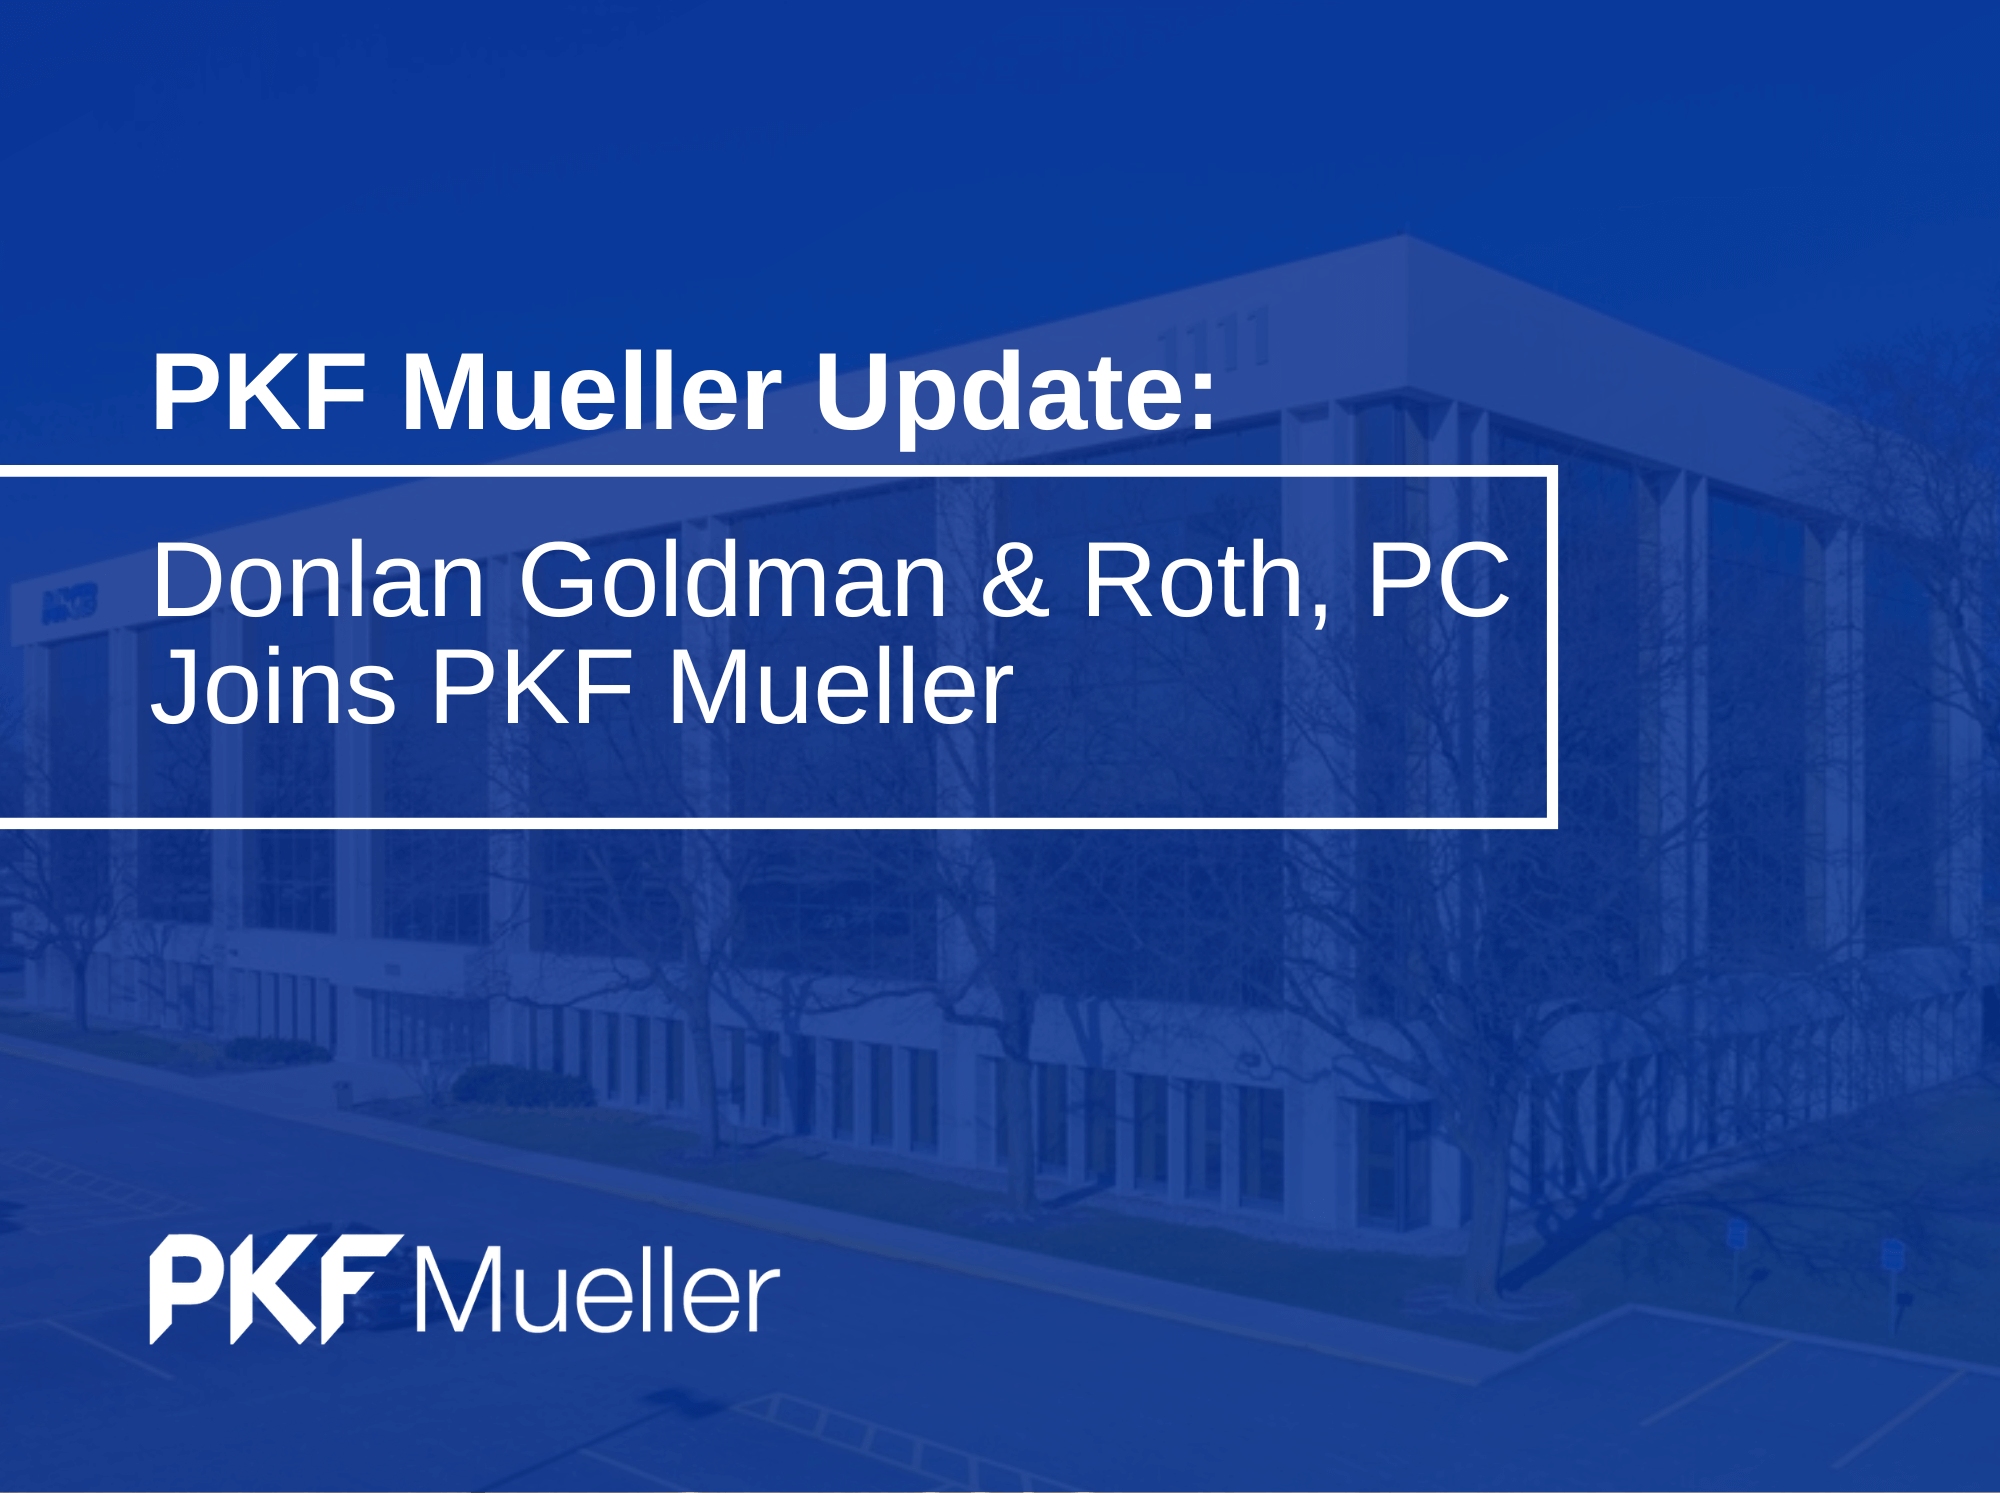 We Are Growing - Donlan Goldman & Roth, PC Joined PKF Mueller